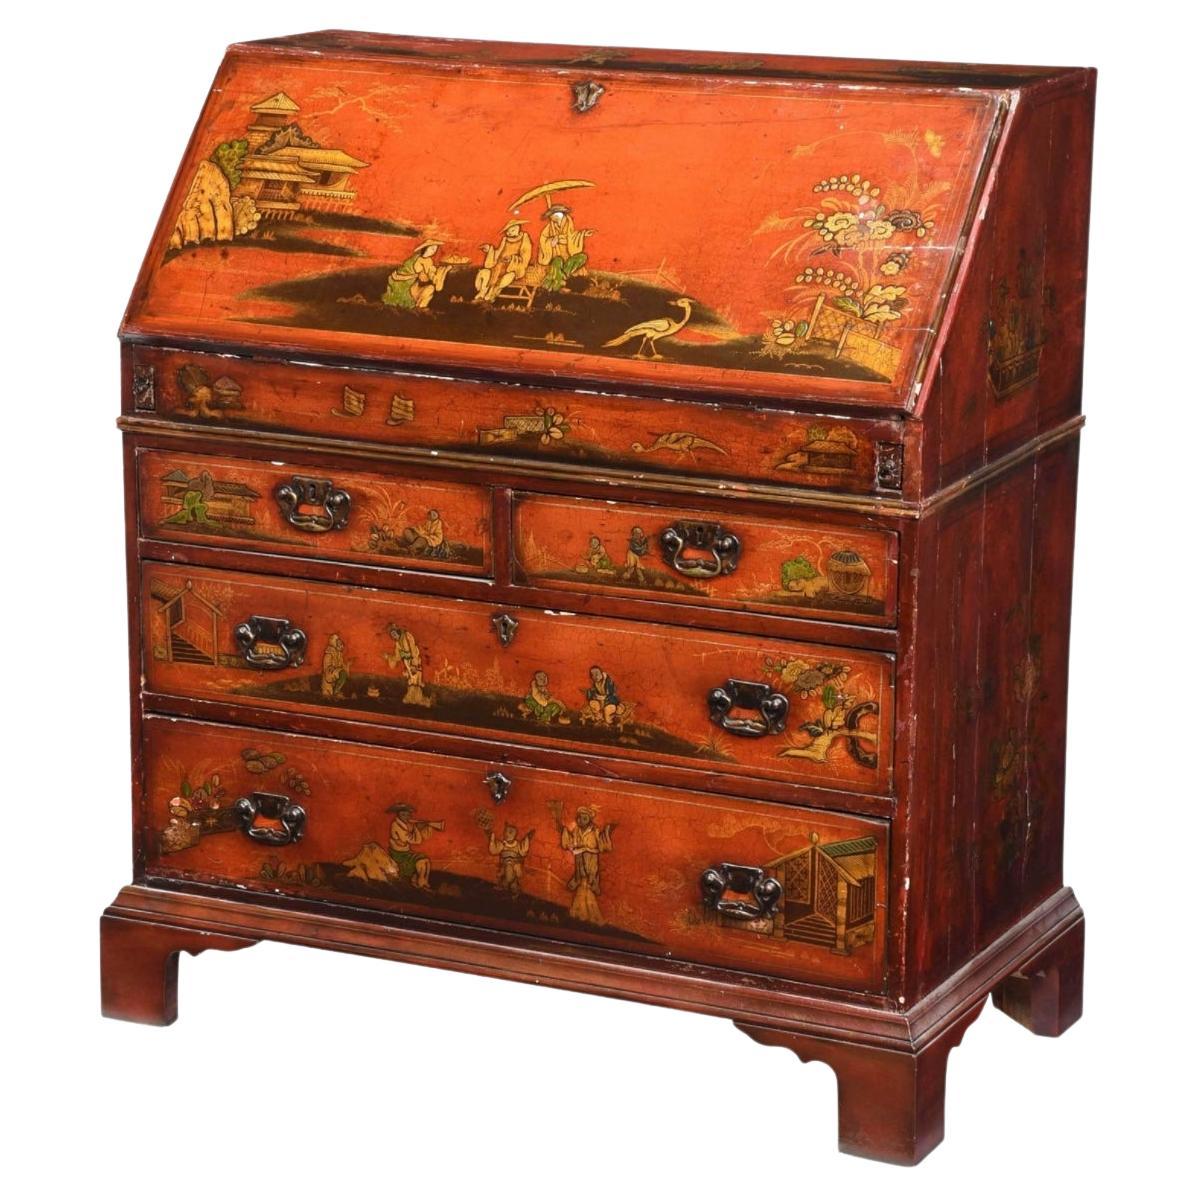 18th Century English Red Chinoiserie Slant Front Desk